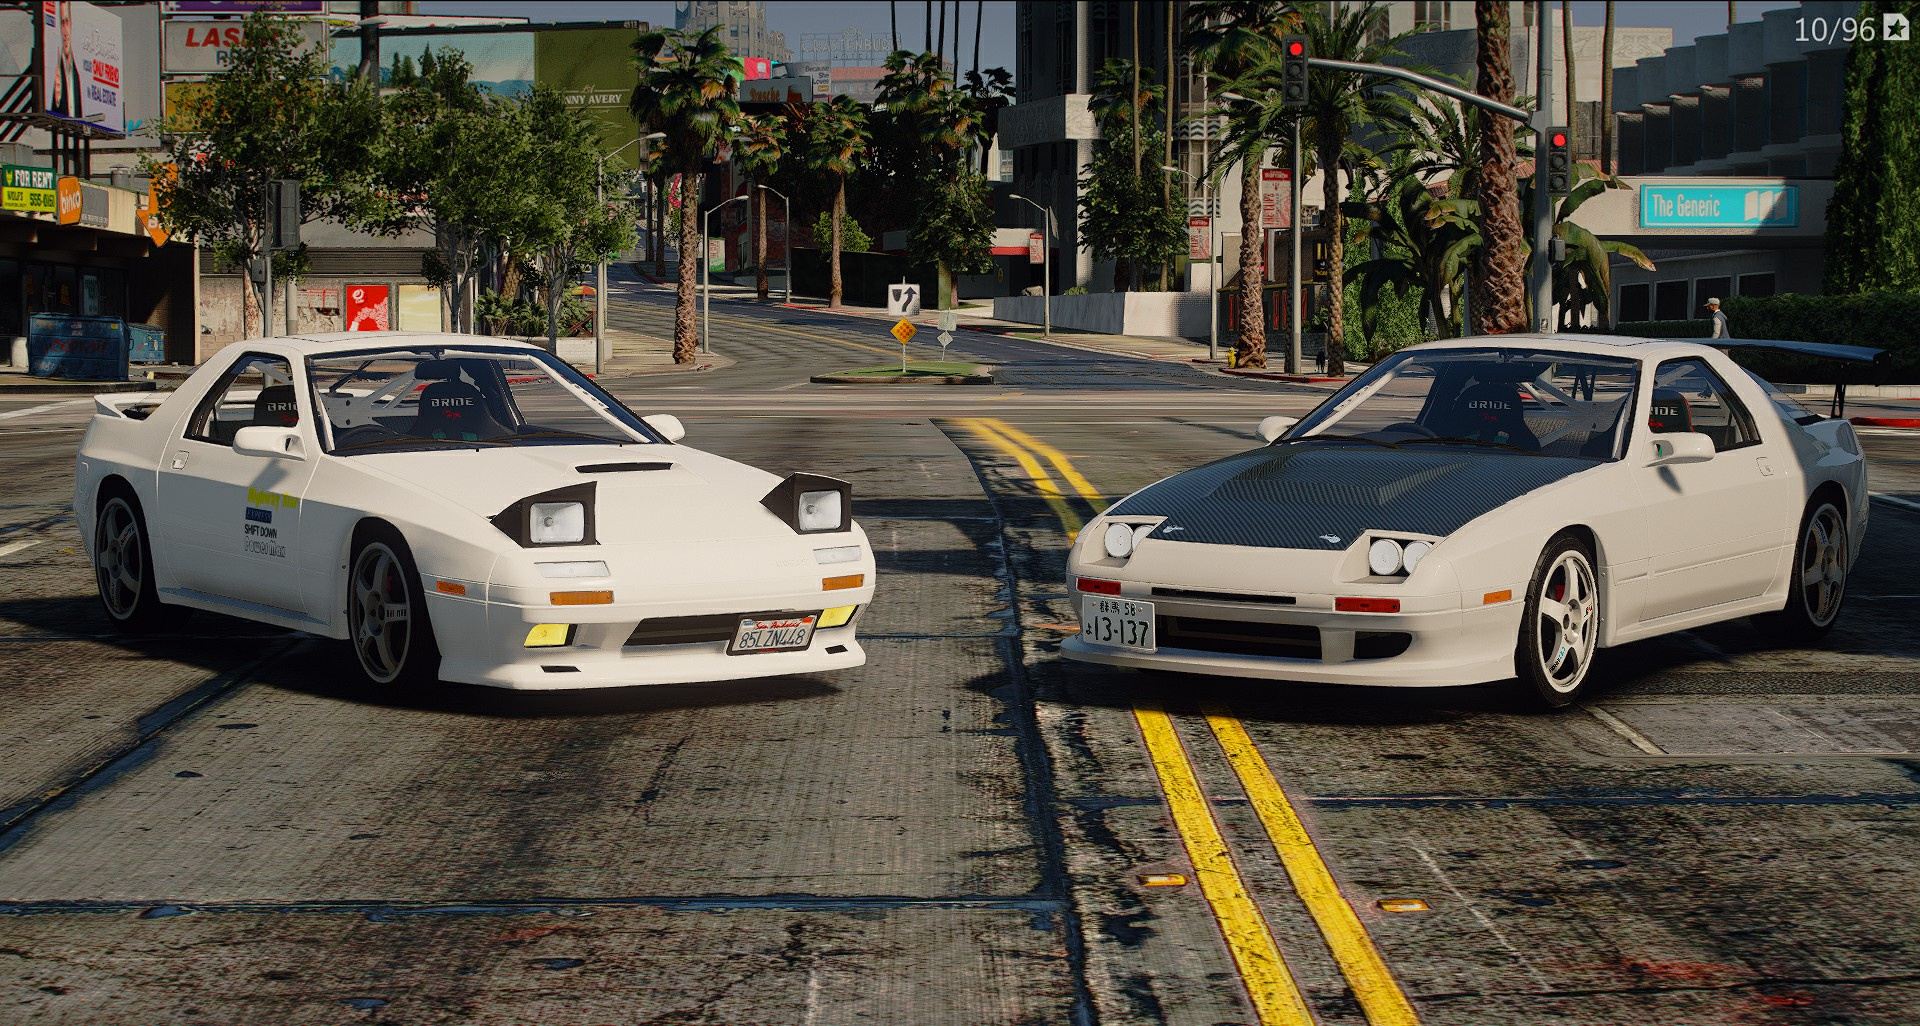 https://img.gta5-mods.com/q95/images/initial-d-style-tuning-parts-for-1990-mazda-savanna-rx-7-iii-fc3s/10e145-6~1.jpg